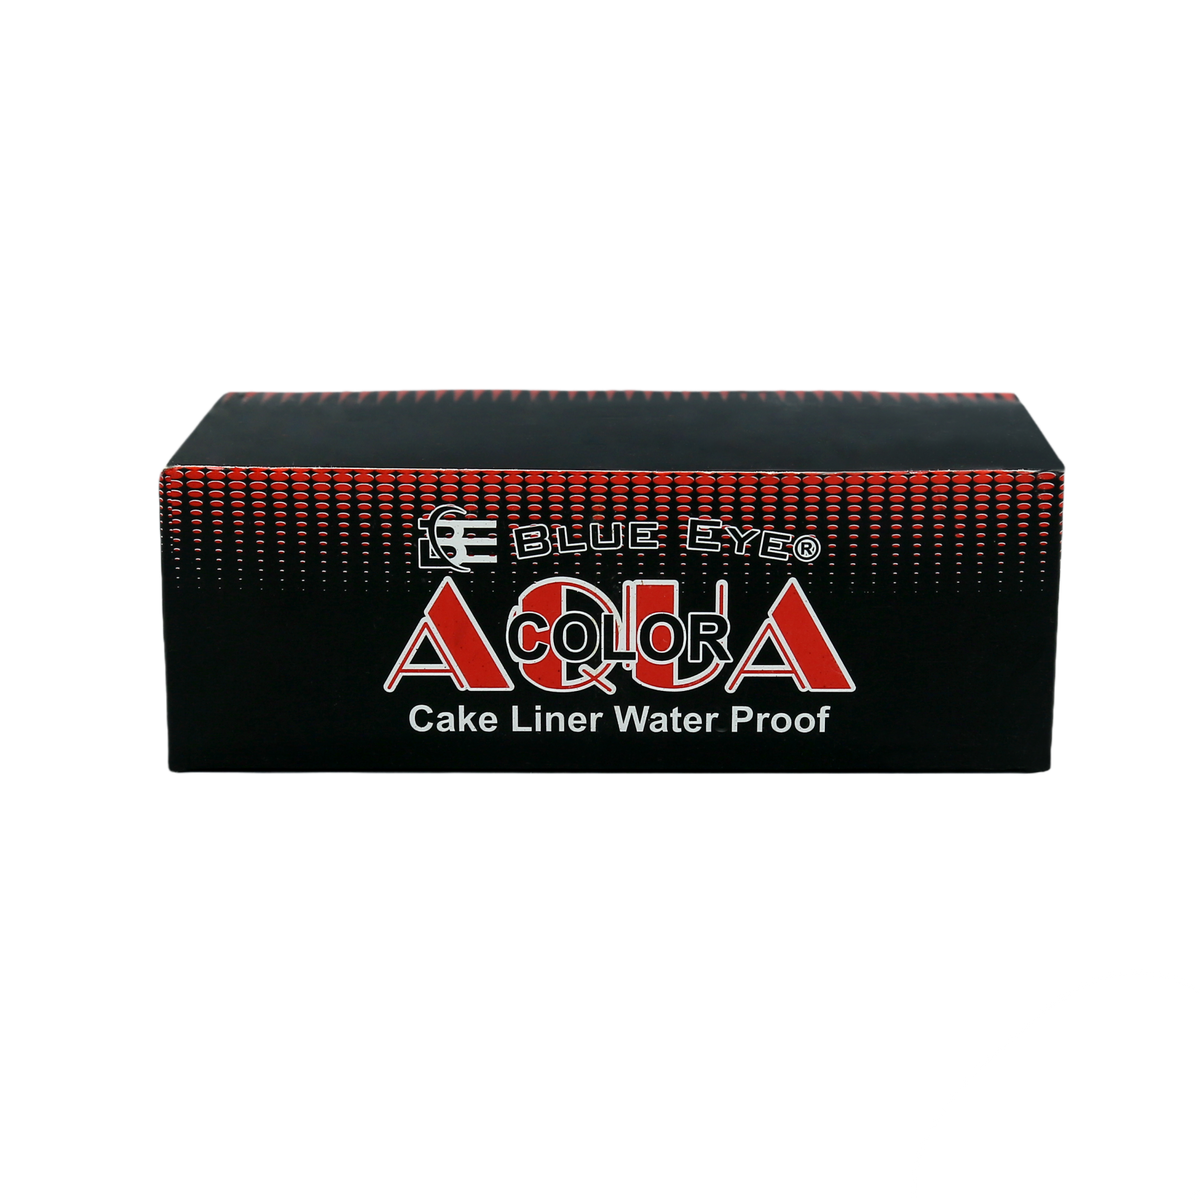 Aqua Color Cake Liner Water Proof Red 18Gms freeshipping - lasertag.pk